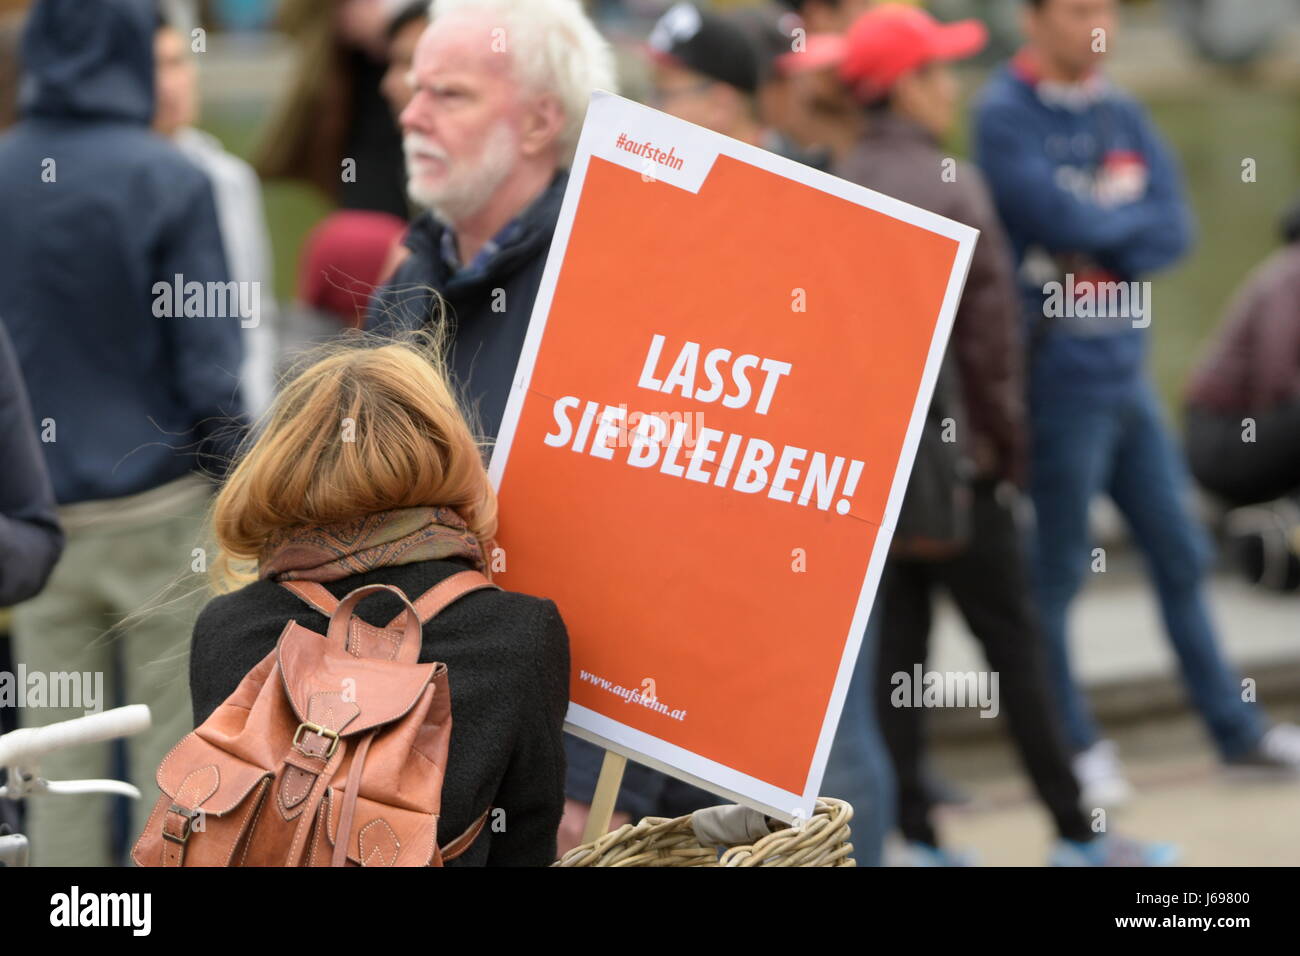 Vienna, Austria.  Saturday, May 20th 2017. Numerous Afghan associations, non-governmental organizations and political organizations are protesting against deportations to Afghanistan on Saturday. Franz Perc / Alamy Live News. Stock Photo